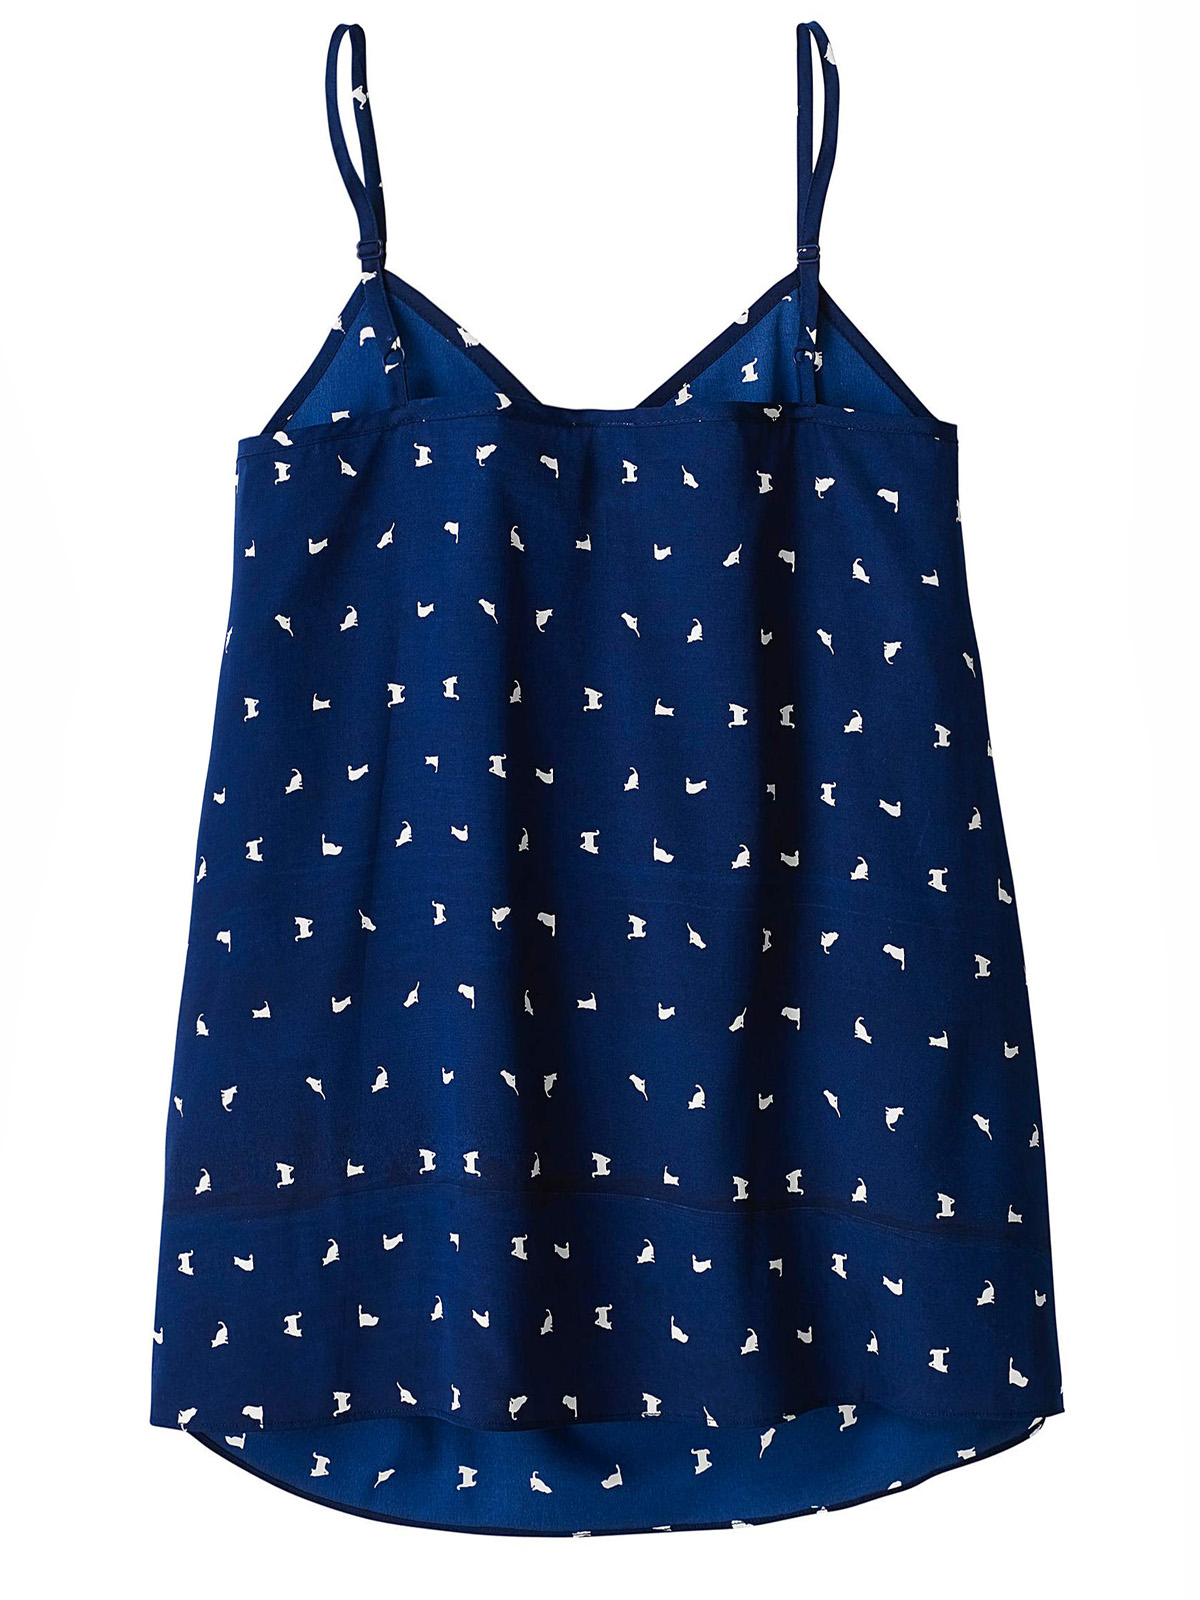 Plus Size wholesale clothing by simply be - - SimplyBe NAVY Cat Print ...